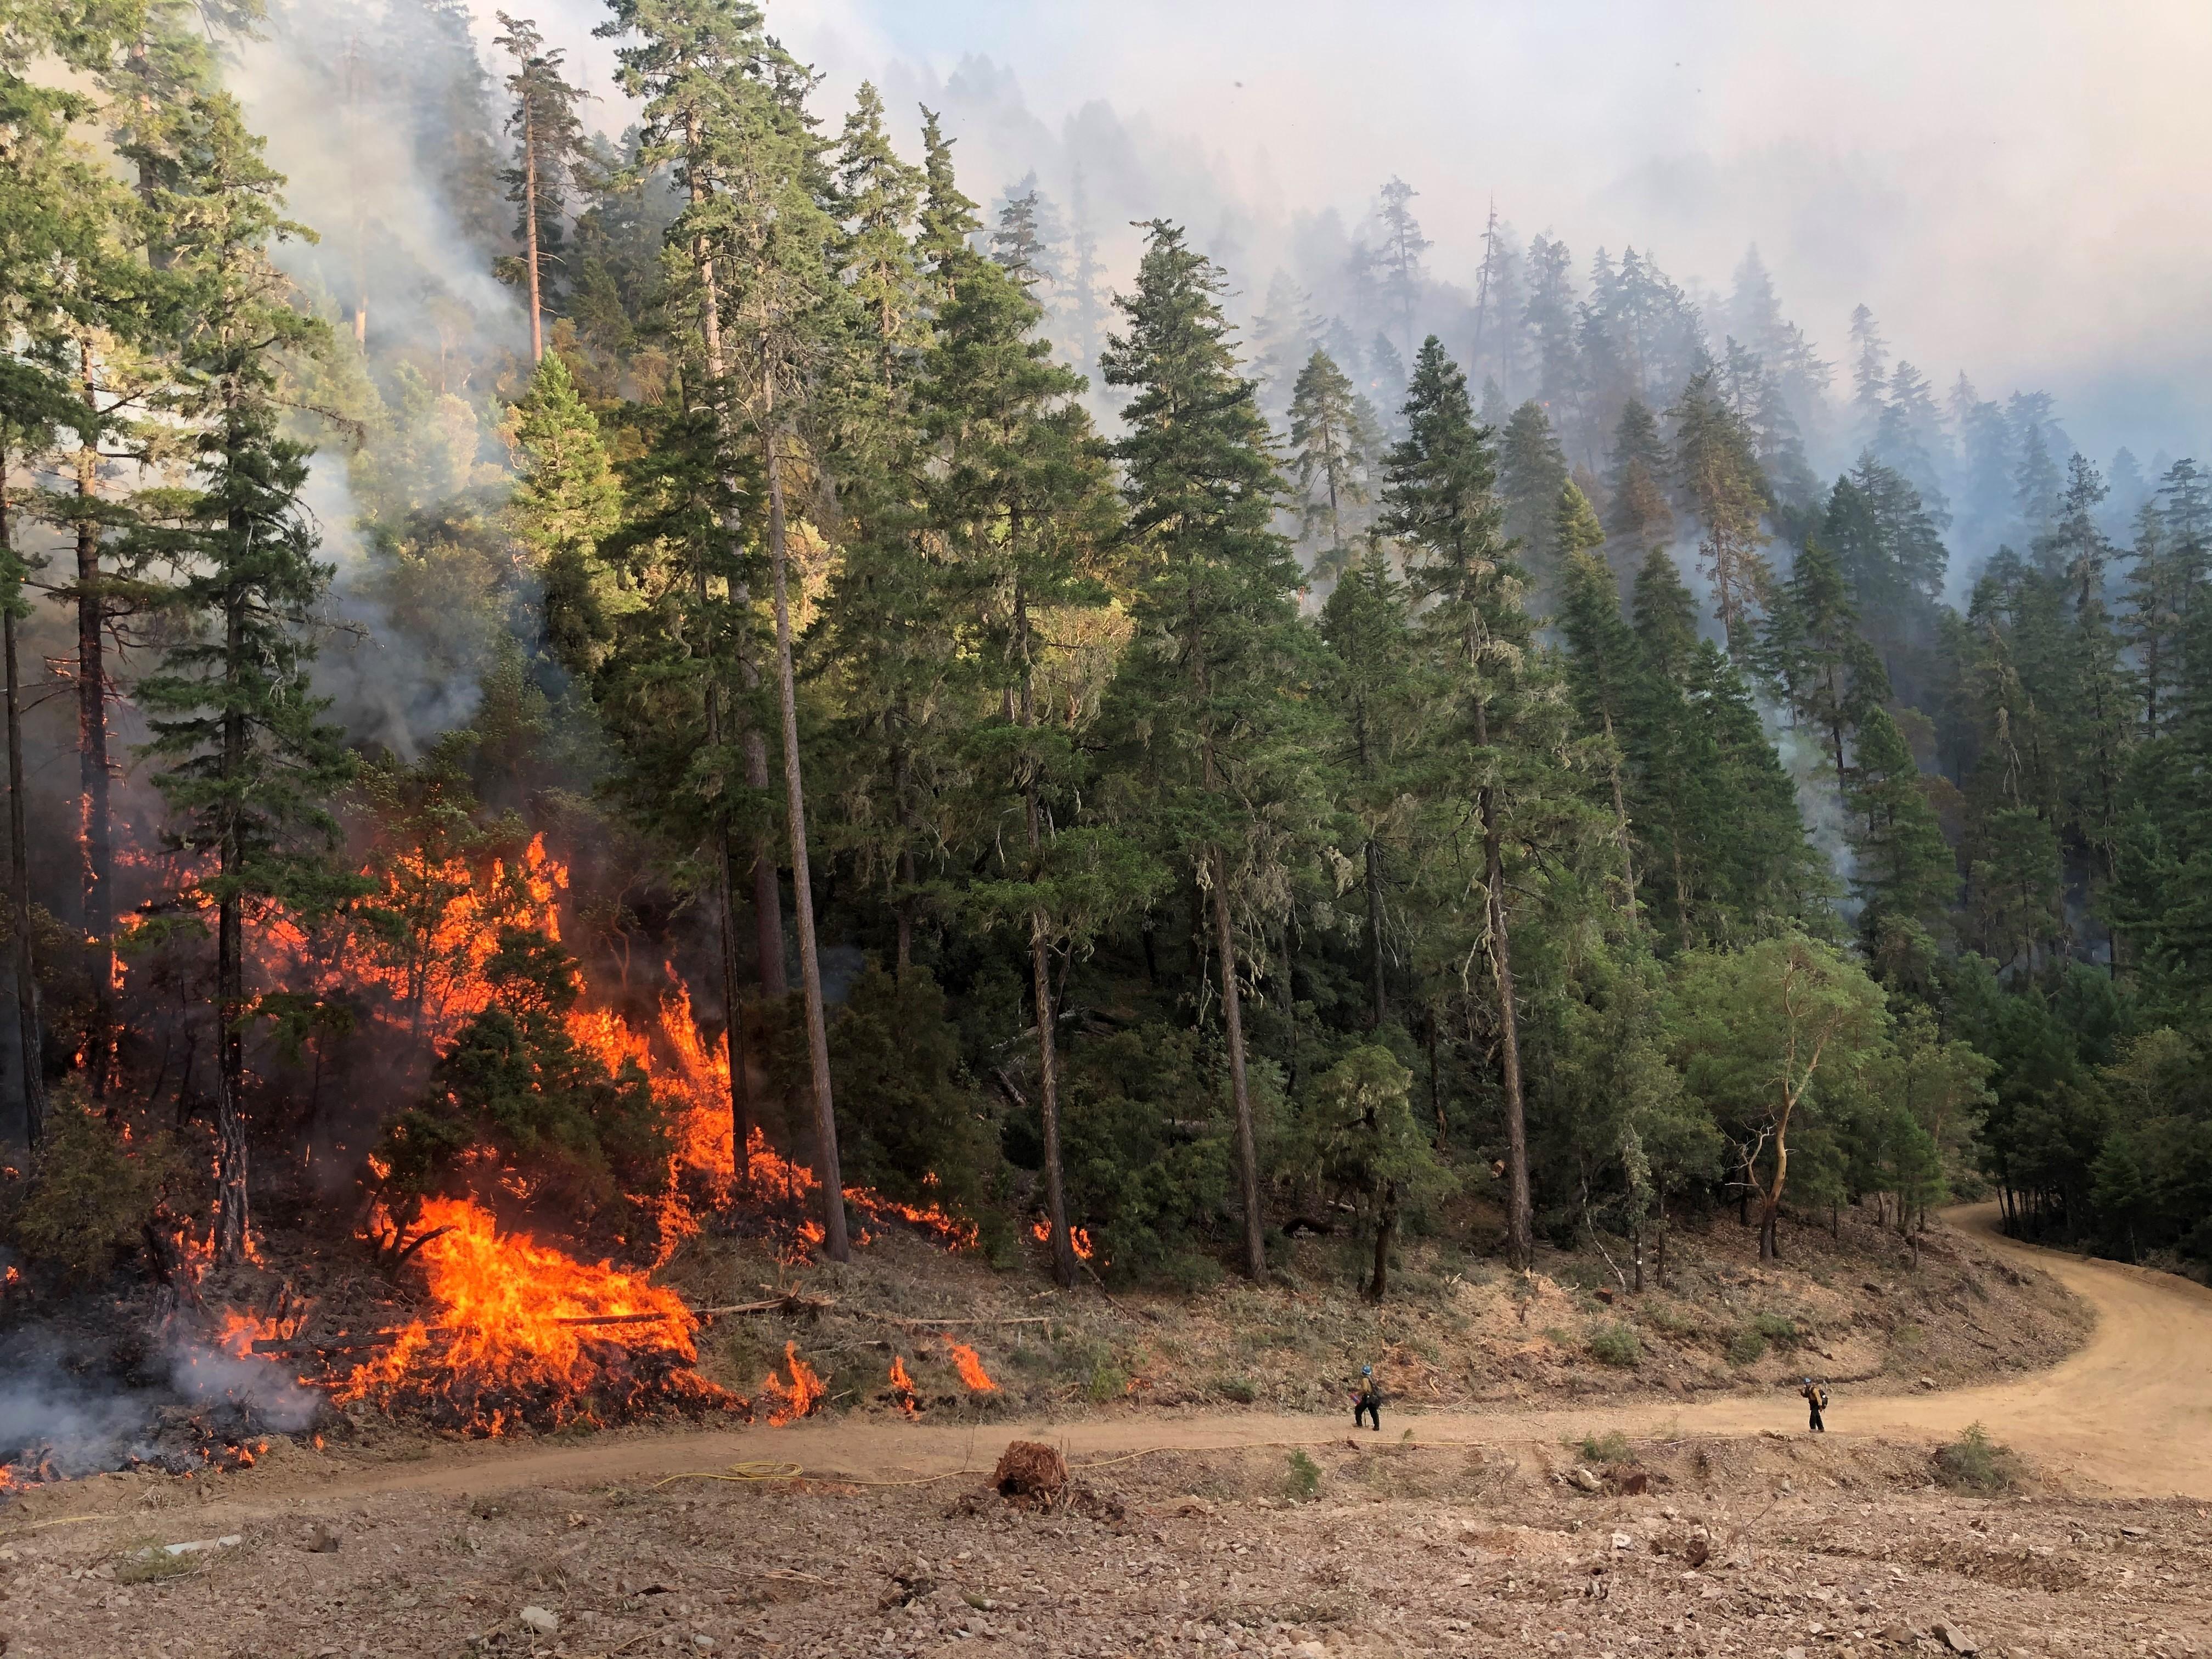 The Red Salmon Complex fire, which started in late July after a lightning strike, has already burned more than 23,000 acres in the lands near the Hoopa Valley and Yurok reservations. (Photo:  Inciweb)